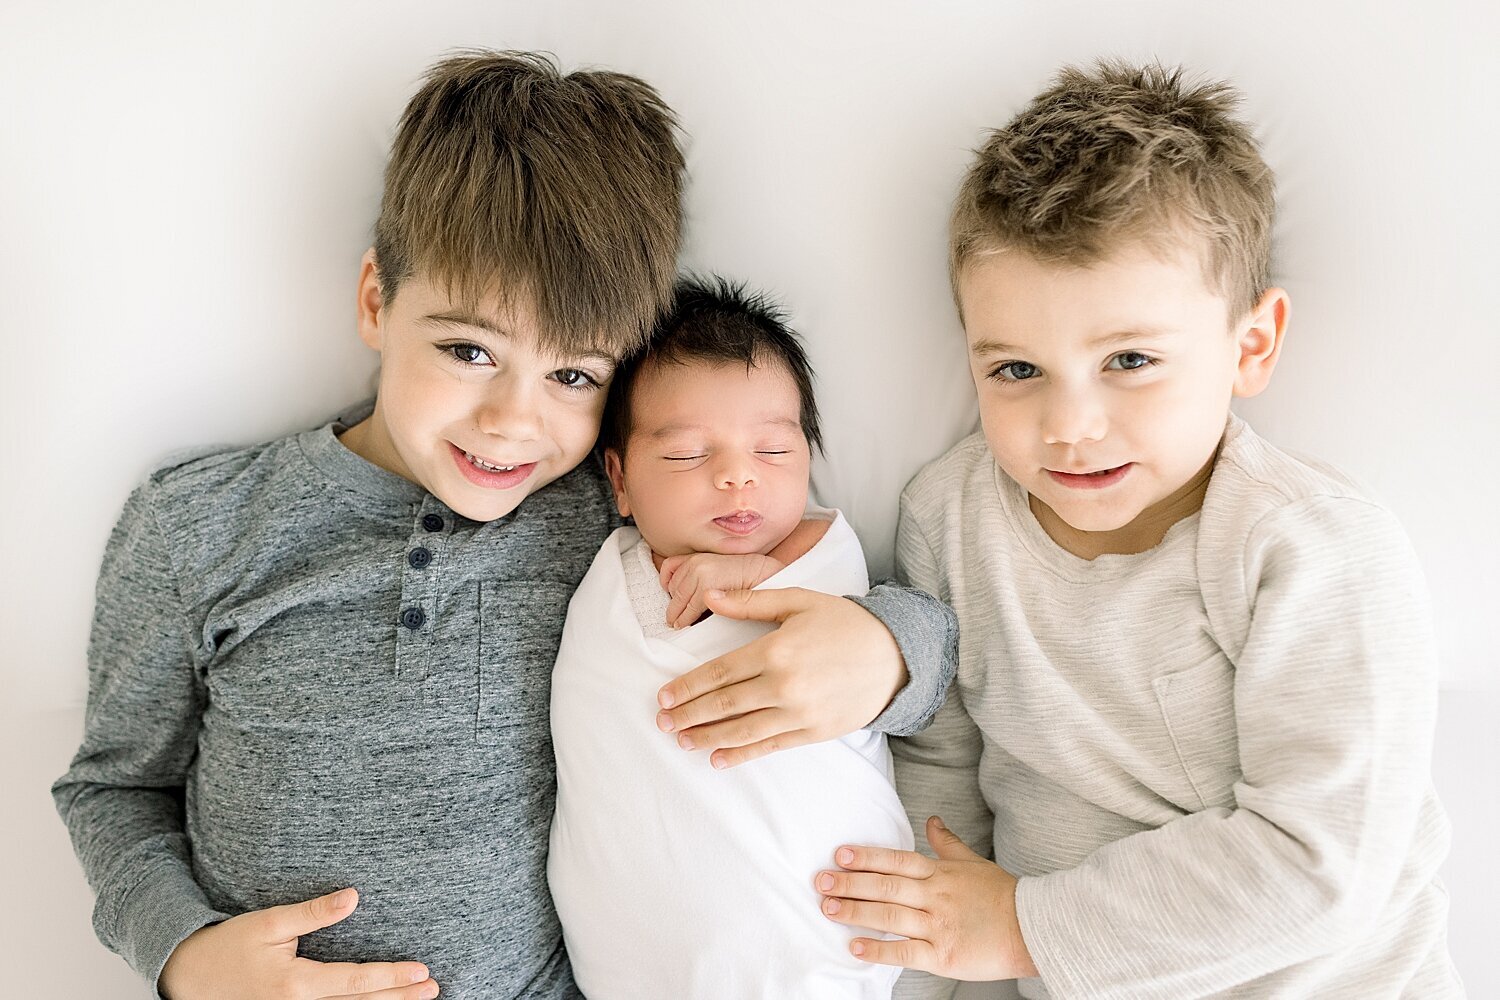 Three brothers laying together during newborn session for youngest brother. Photo by Ambre Williams Photography.